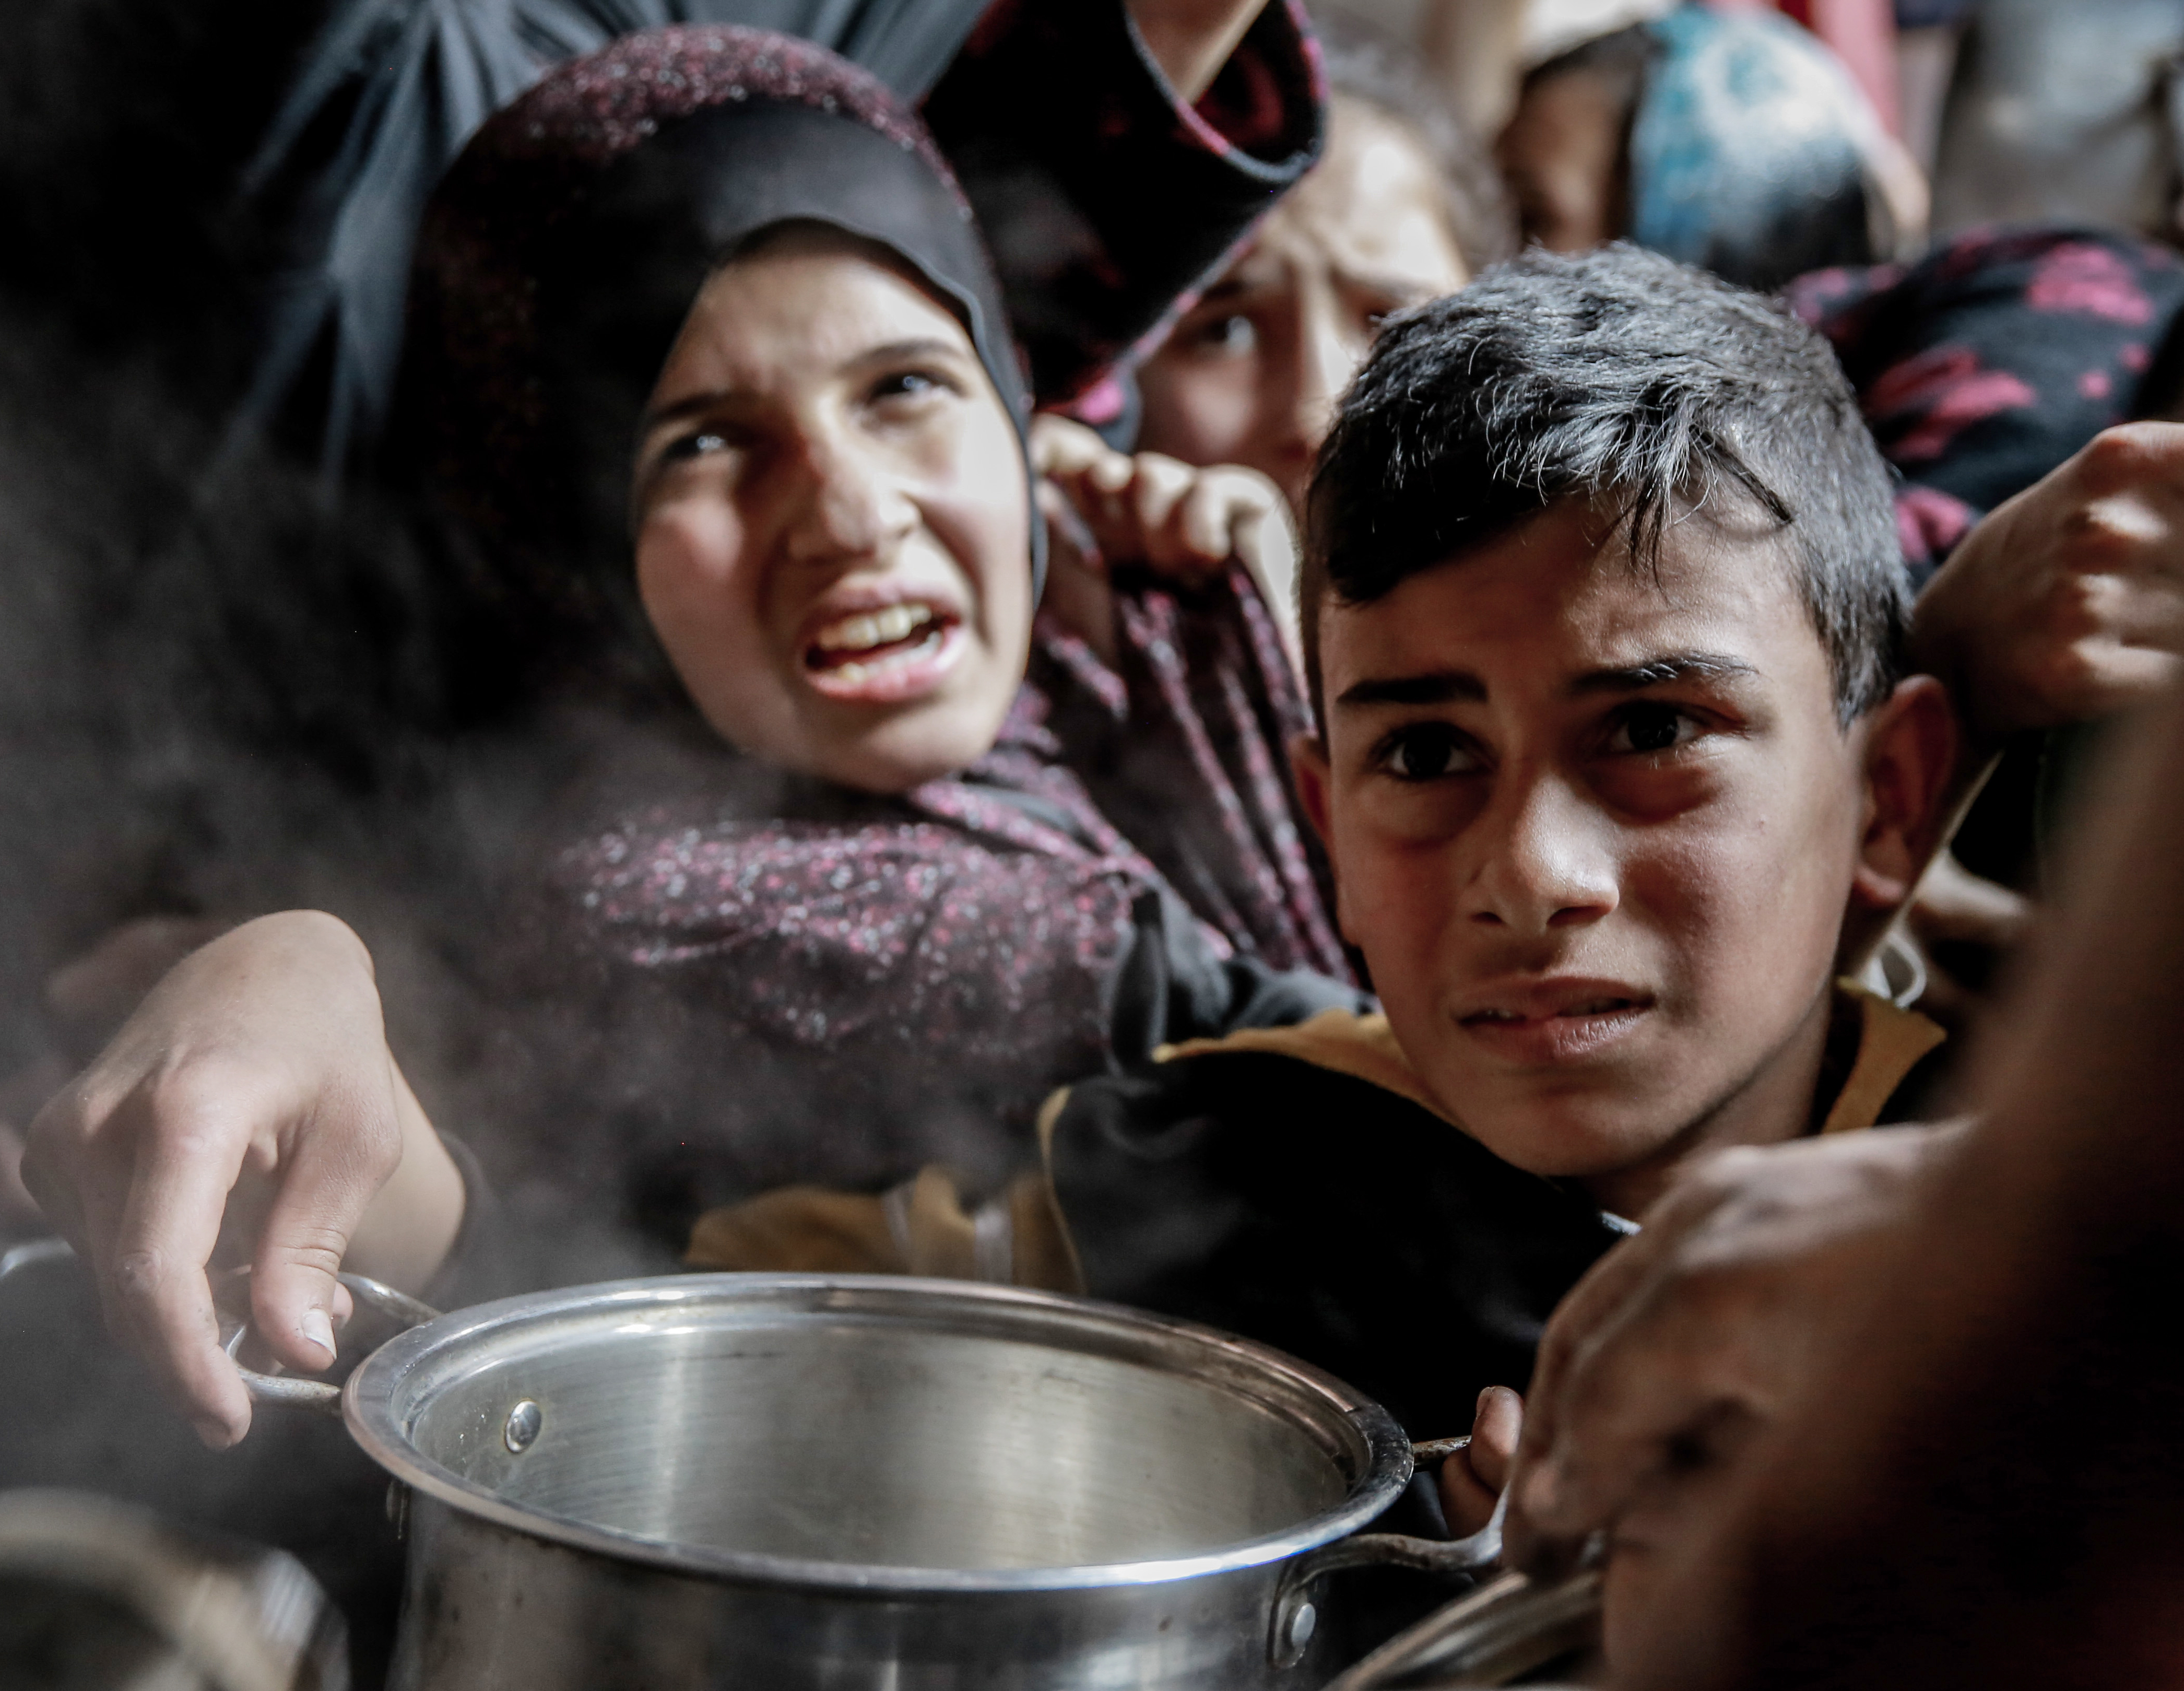 A child is seen holding an empty pan as he waits with others to receive hot food distributed by charitables and charity organization in Gaza City